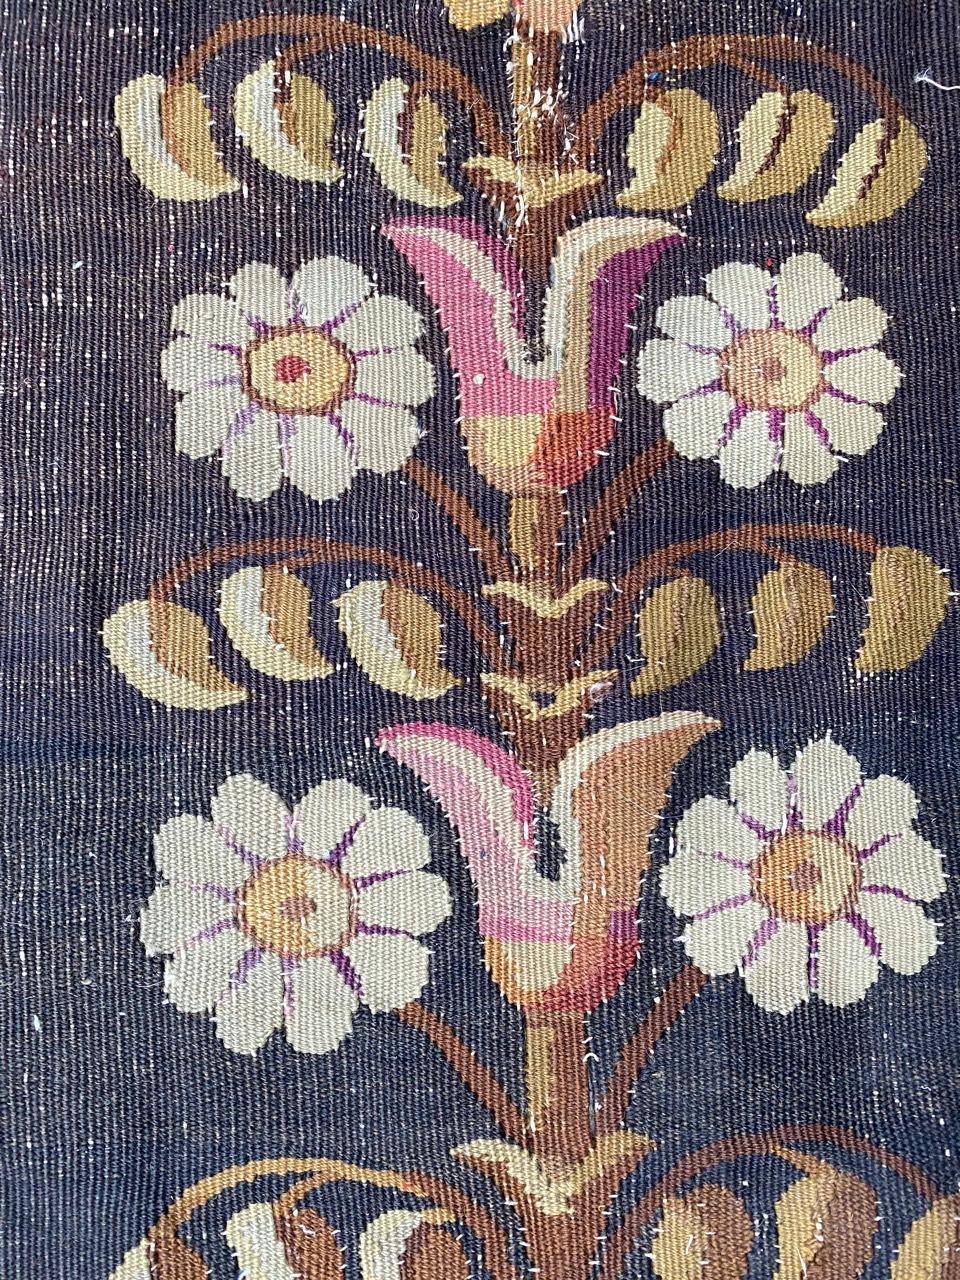 Beautiful 19th century French Aubusson tapestry fragment, originally from a border of Aubusson rug or tapestry, entirely handwoven with wool on cotton foundation.